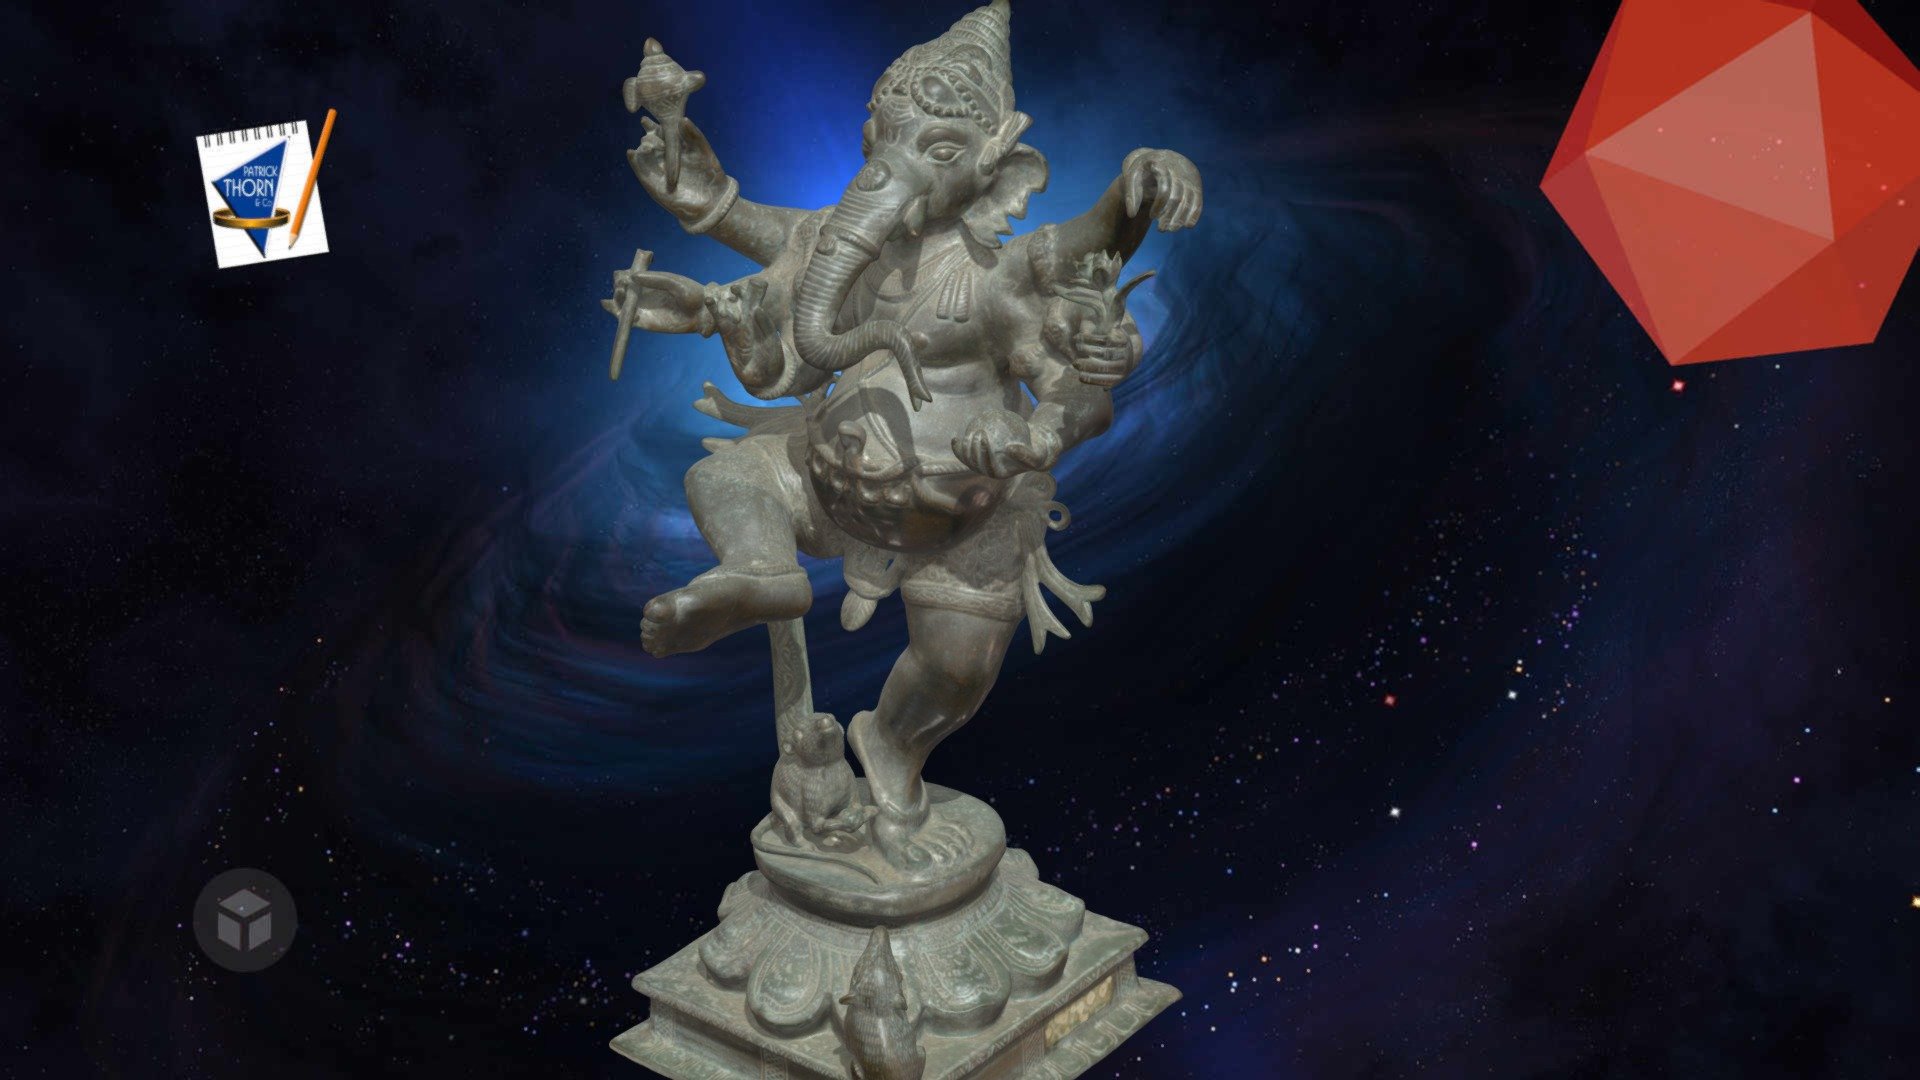 Scanned with Artec Leo by Patrick Thorn - Ganesh God Statue - 3D model by Patrick Thorn (@patrickthorn) 3d model